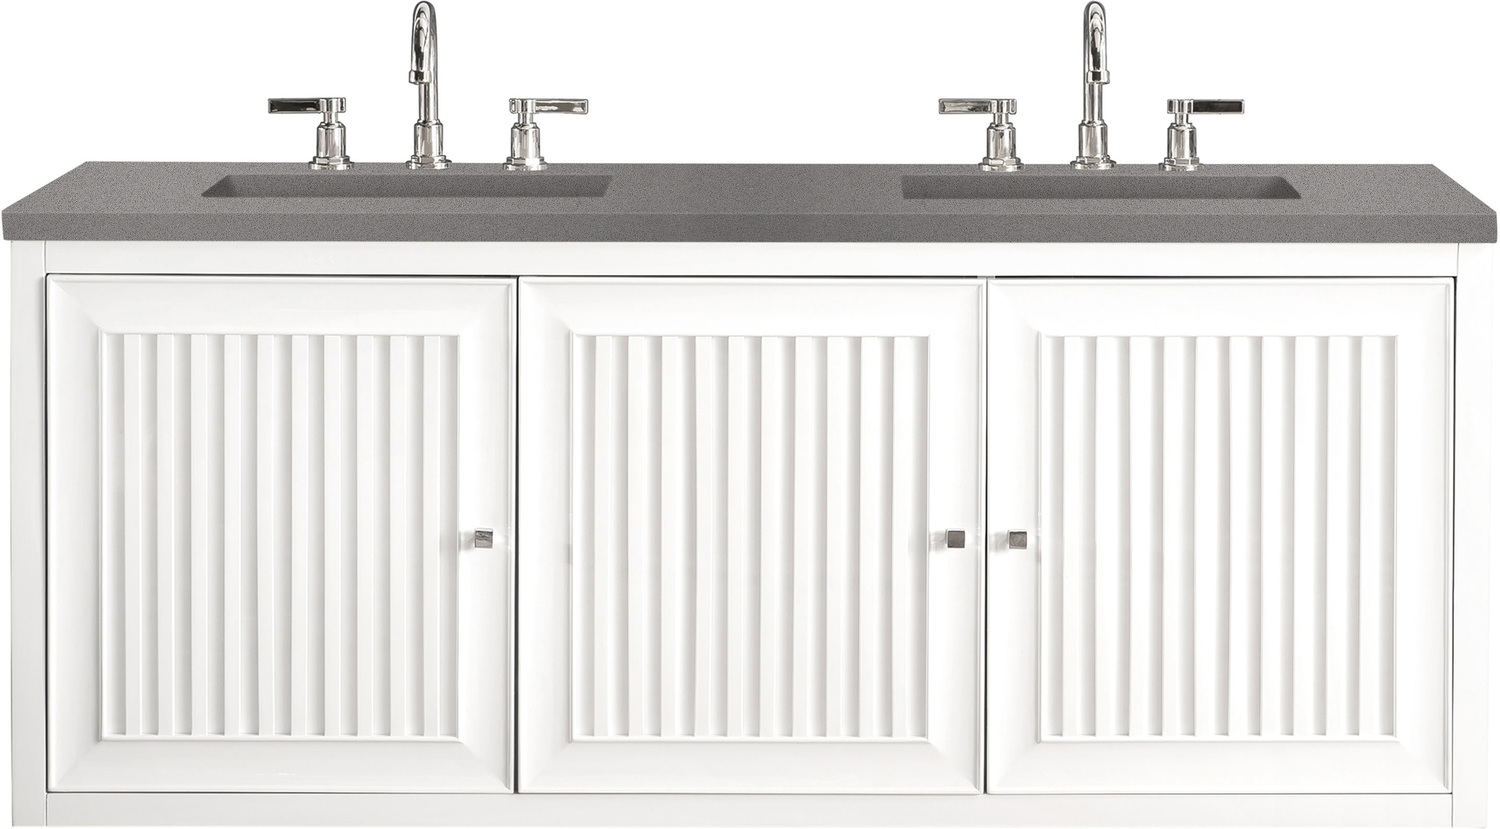 72 inch double sink vanity with top James Martin Vanity Glossy White Traditional